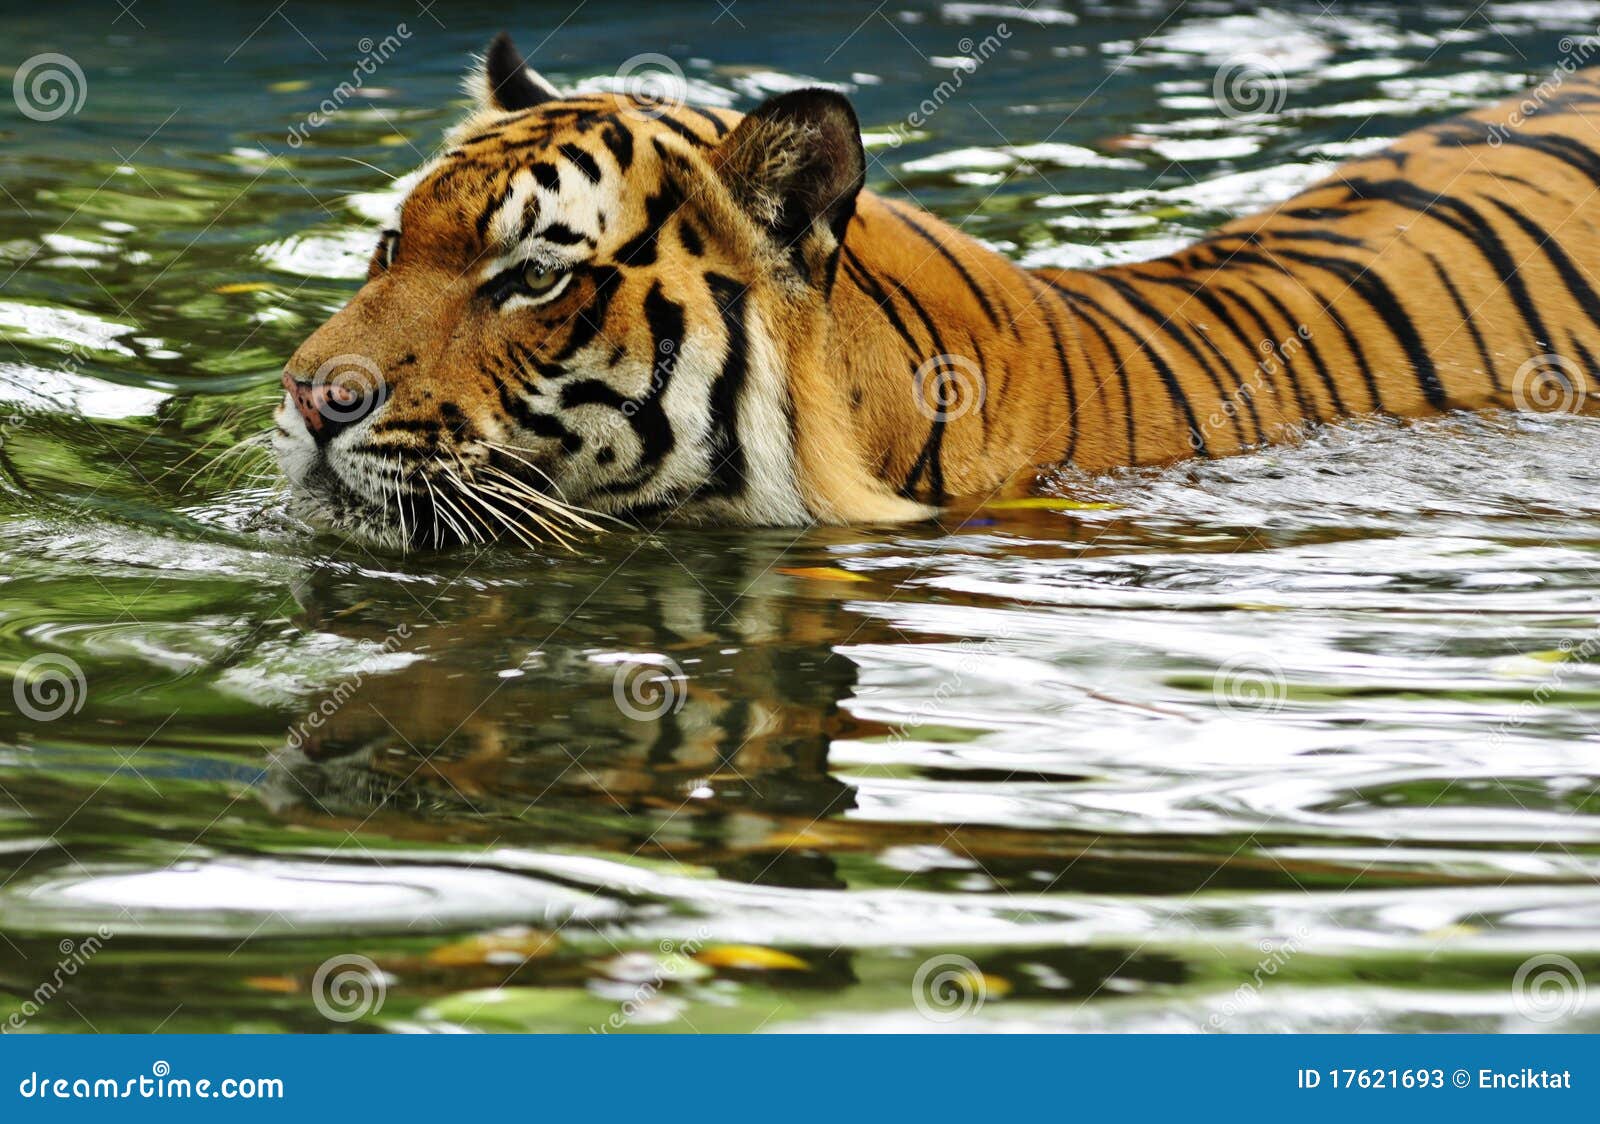 Tiger Swimming In Water